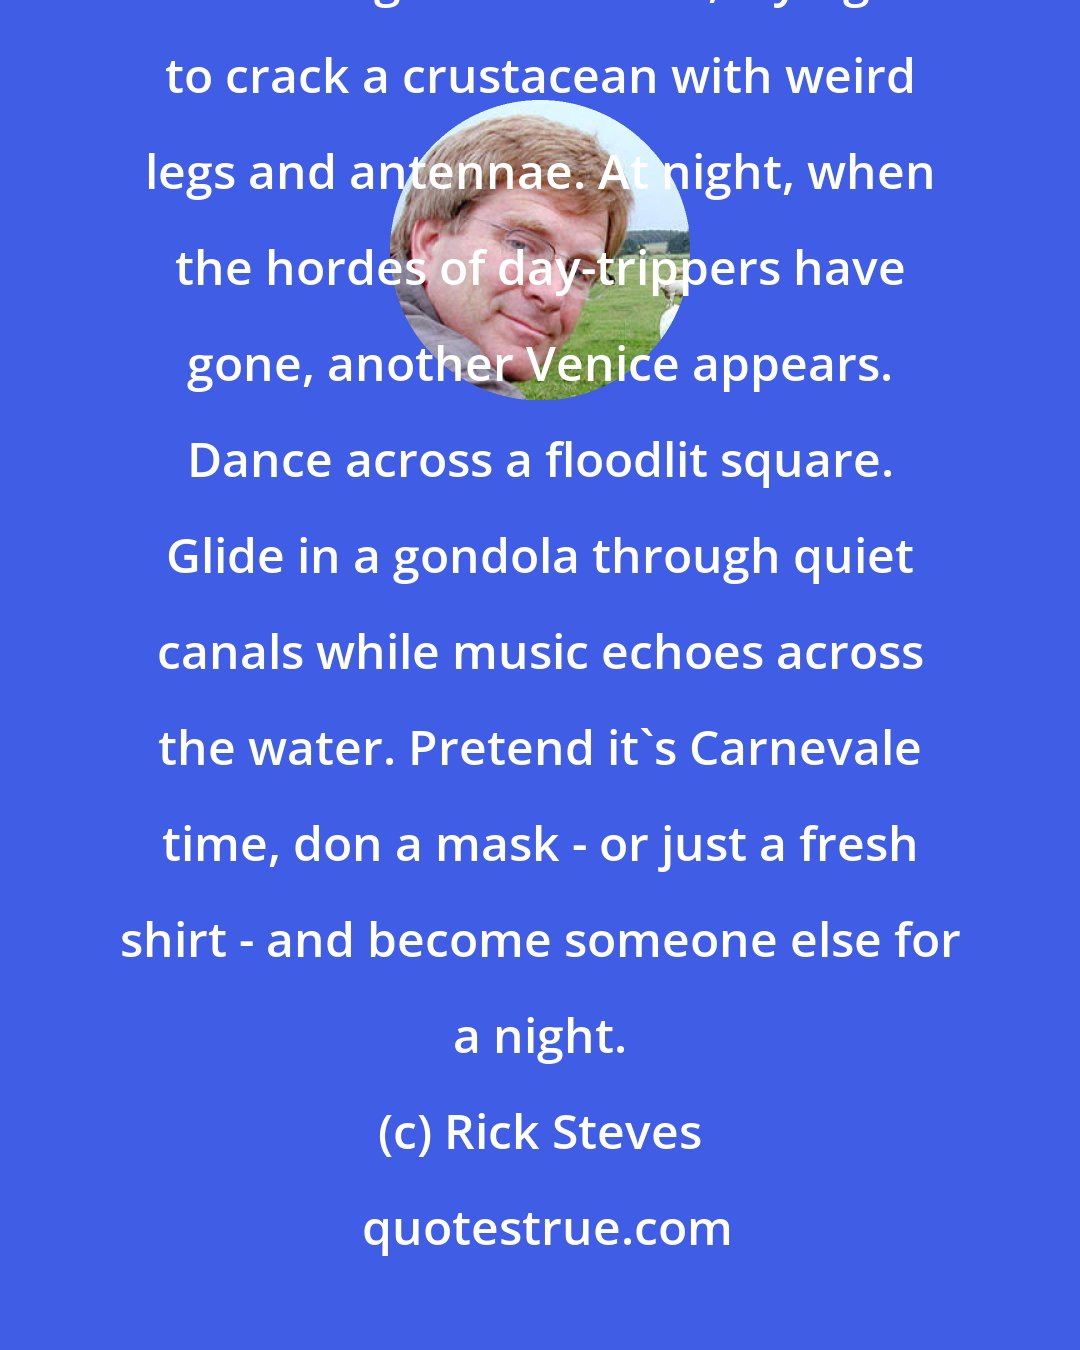 Rick Steves: By day, Venice is a city of museums and churches, packed with great art. Linger over lunch, trying to crack a crustacean with weird legs and antennae. At night, when the hordes of day-trippers have gone, another Venice appears. Dance across a floodlit square. Glide in a gondola through quiet canals while music echoes across the water. Pretend it's Carnevale time, don a mask - or just a fresh shirt - and become someone else for a night.